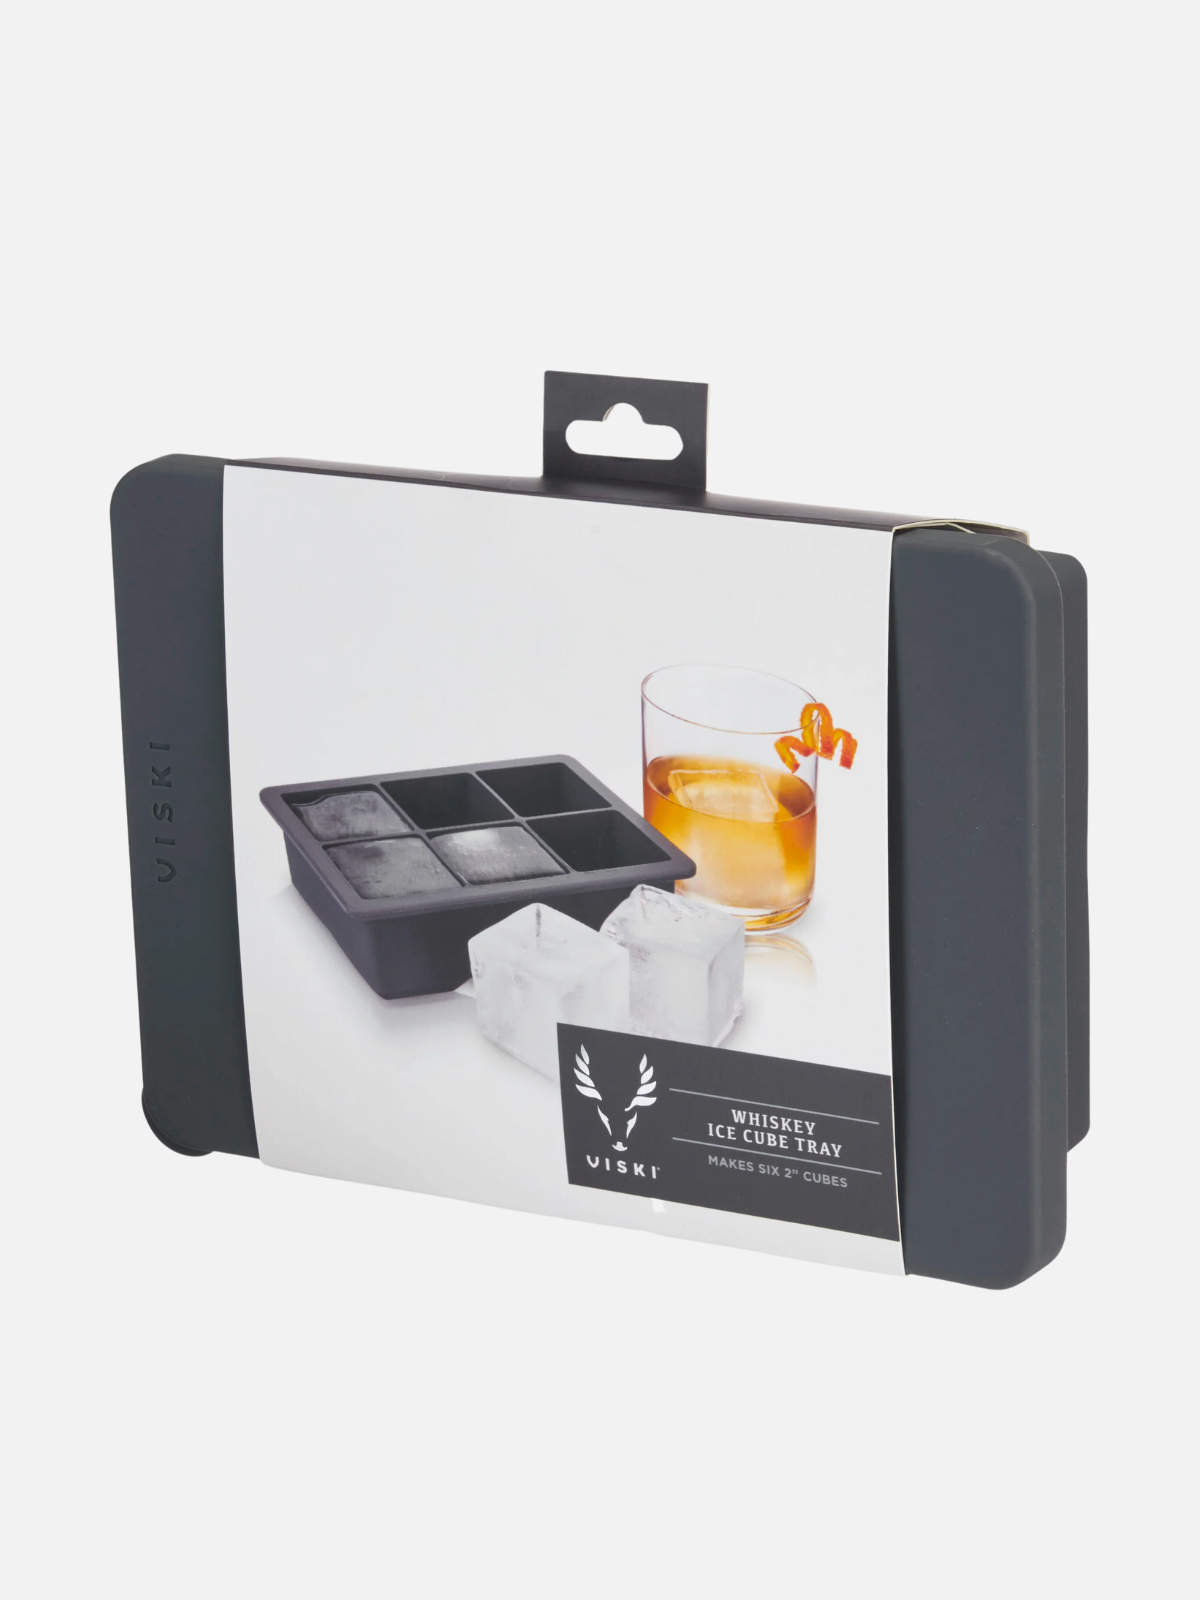 viski professional whiskey silicone ice cube tray perfect for whiskey on the rocks, old fashioned, negroni, etc. comes with lid to prevent spillage in freezer - kempt athens ga georgia men's clothing store bar tools